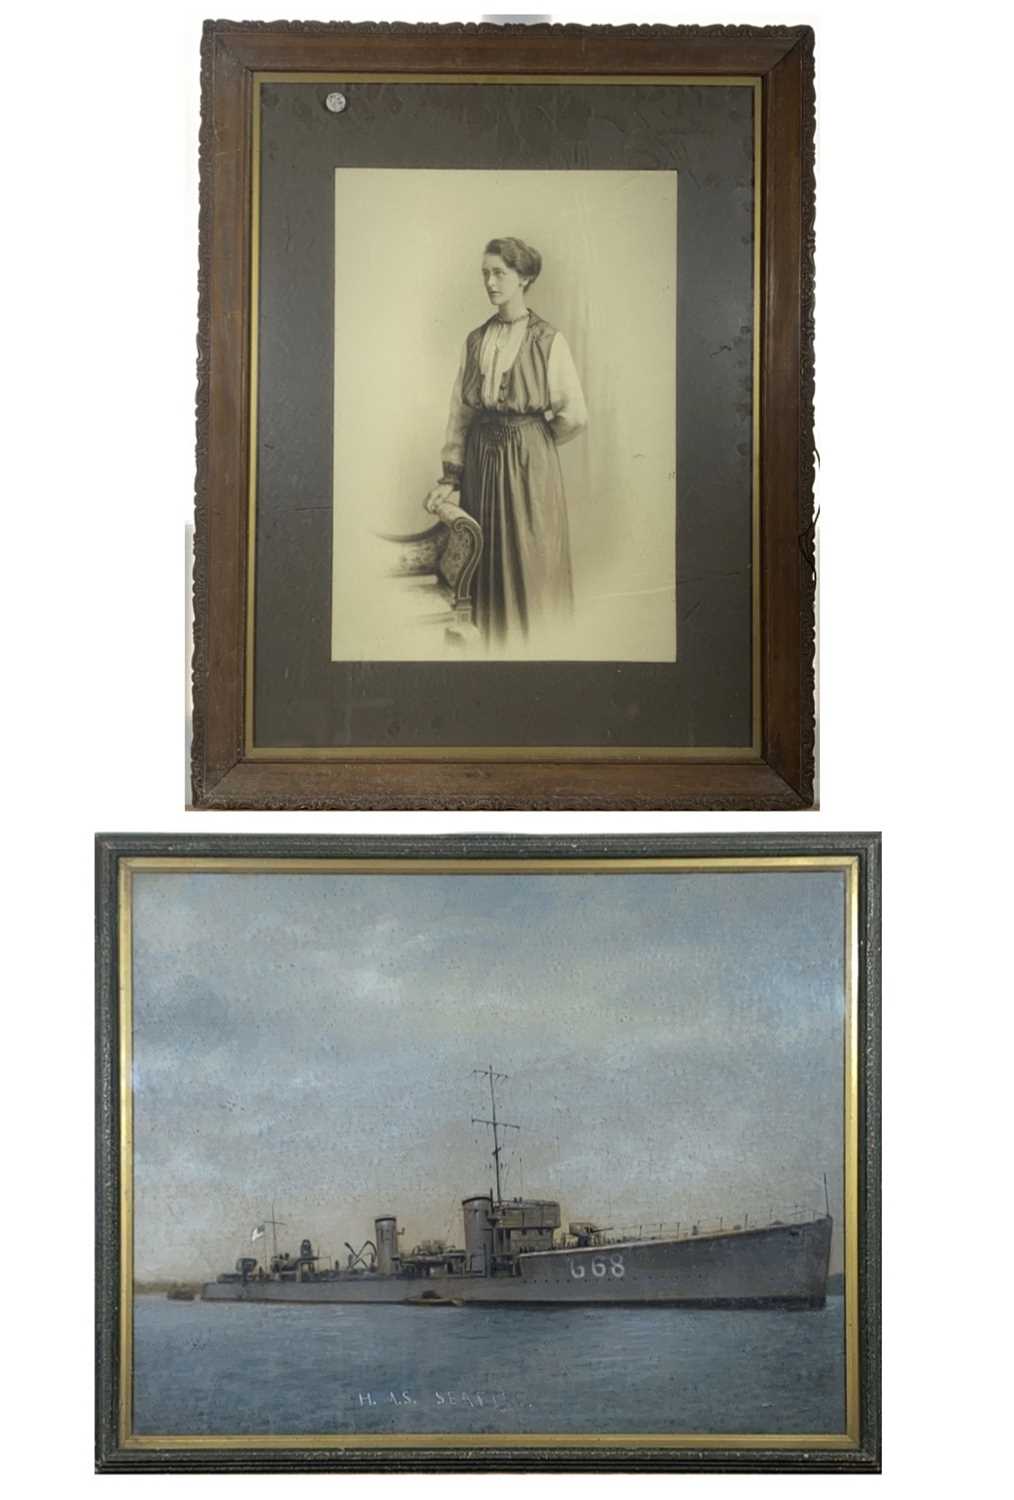 A painting of the warship HMS Seafire 38 x 48cm, together with an Edwardian photograph of a lady